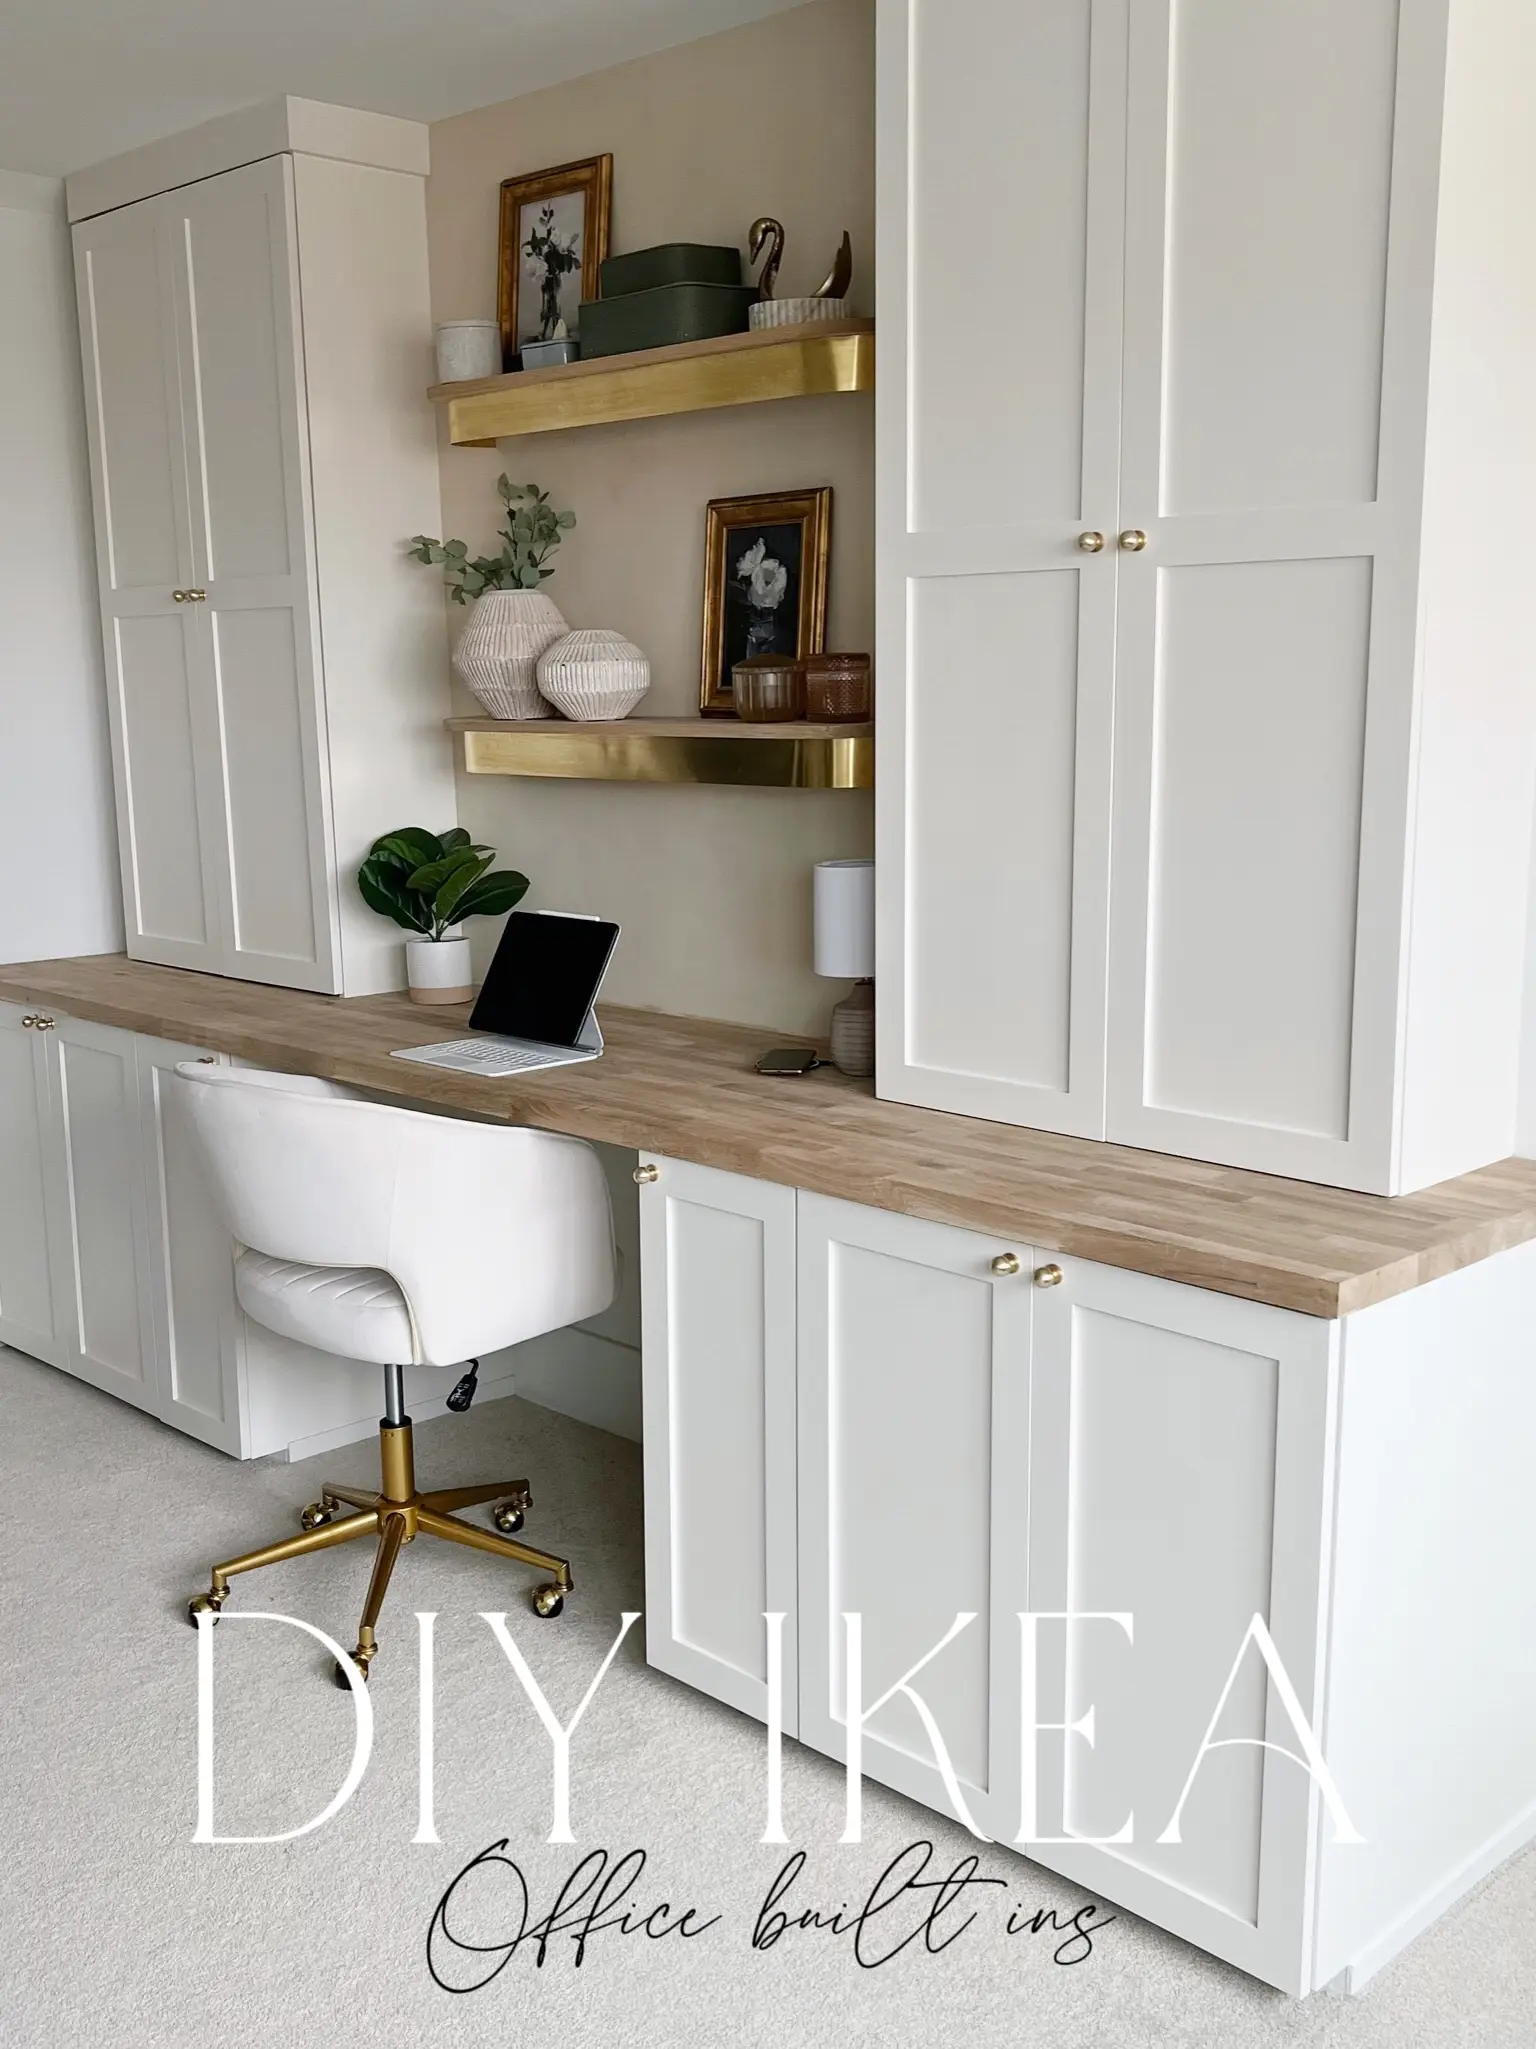 Built-in Office Cabinets